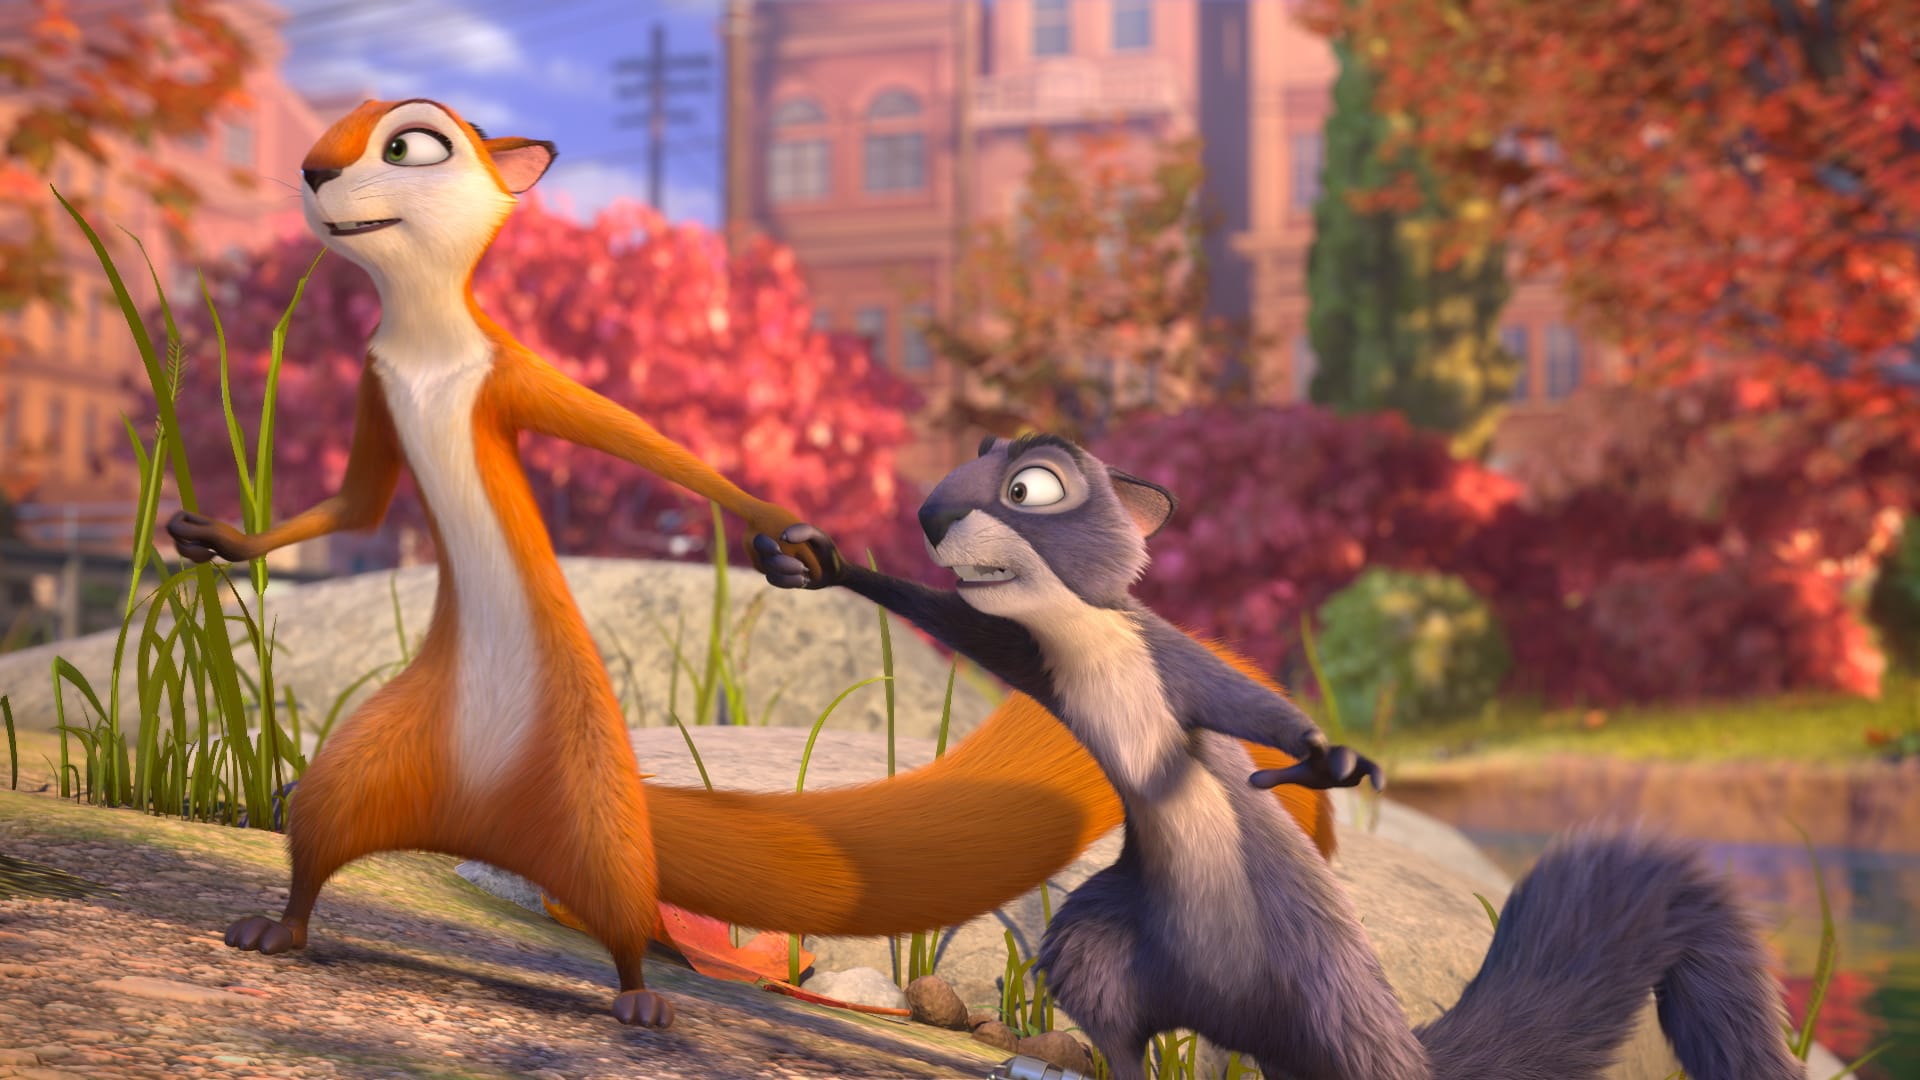 Open Road Films
Andie, voiced by Katherine Heigl, left, pulls Surly, voiced by Will Arnett, through the park in &quot;The Nut Job.&quot;